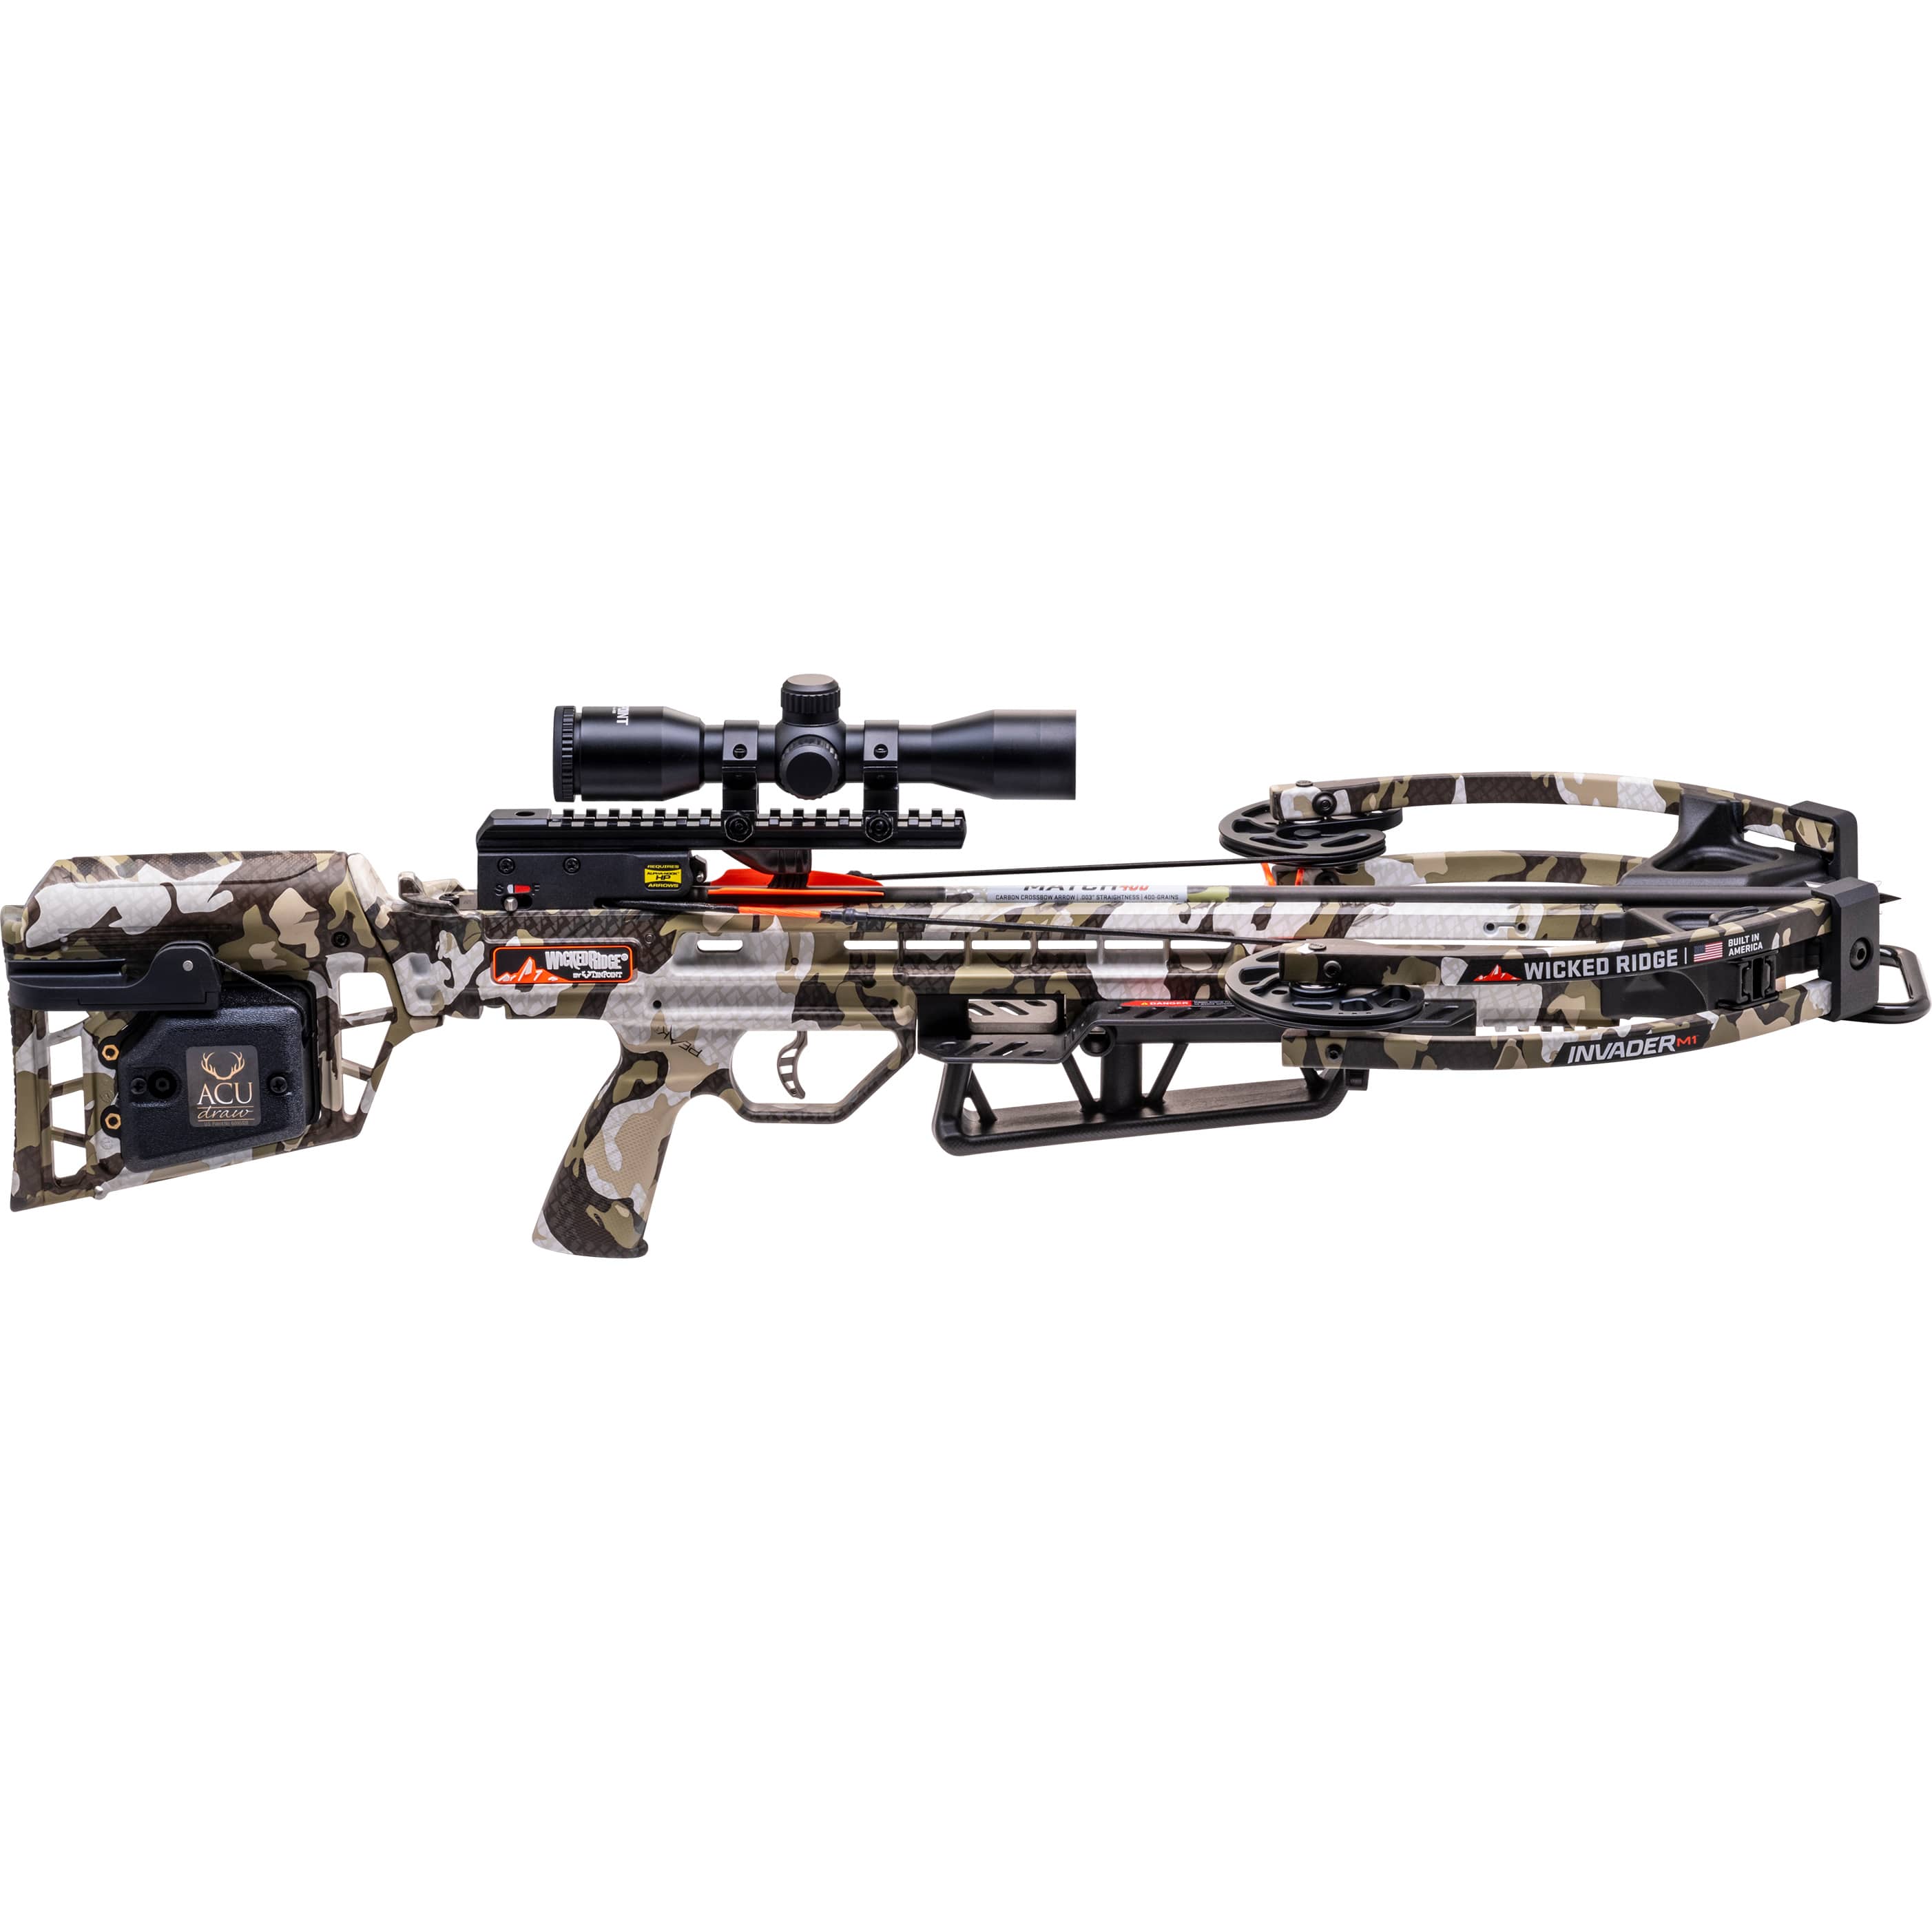 Wicked Ridge Invader M1 Crossbow Package with ACUdraw & Pro-View 400 Scope